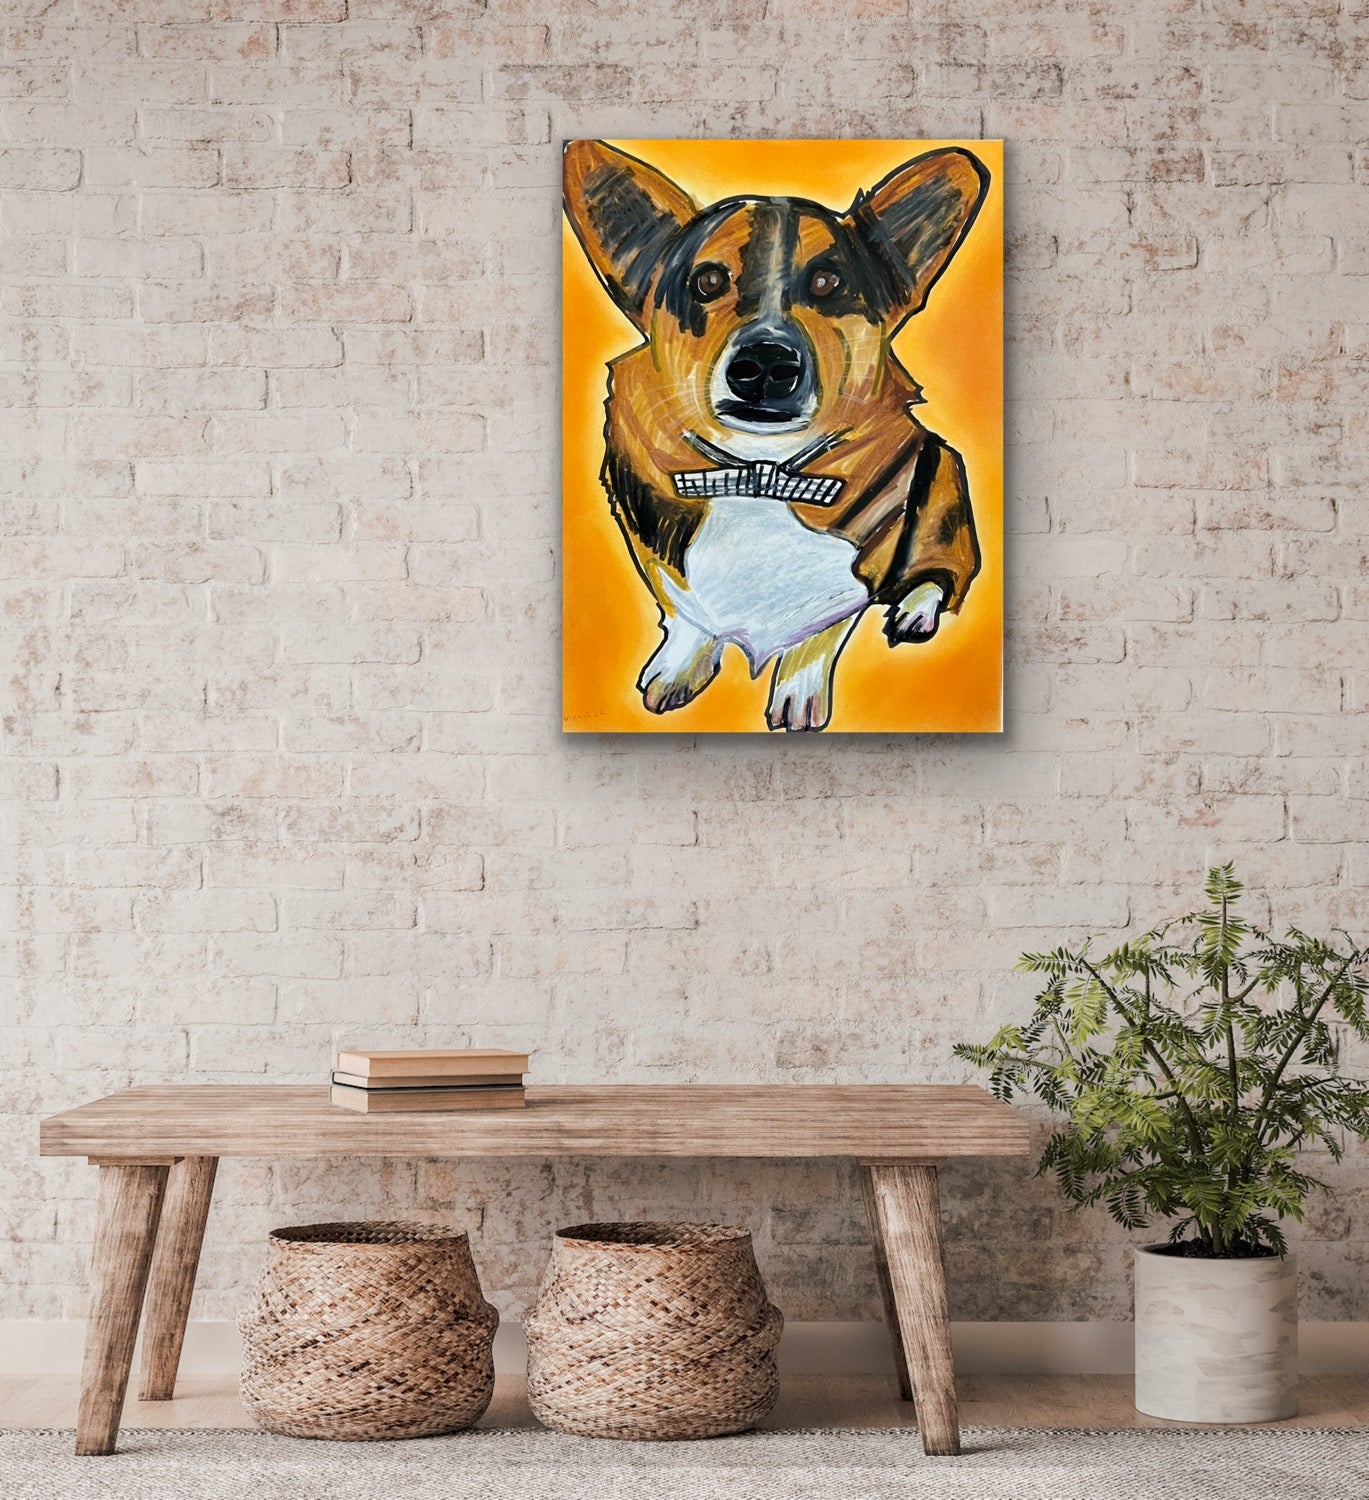 Amazing Corgi- Stretched Canvas Print in more sizes